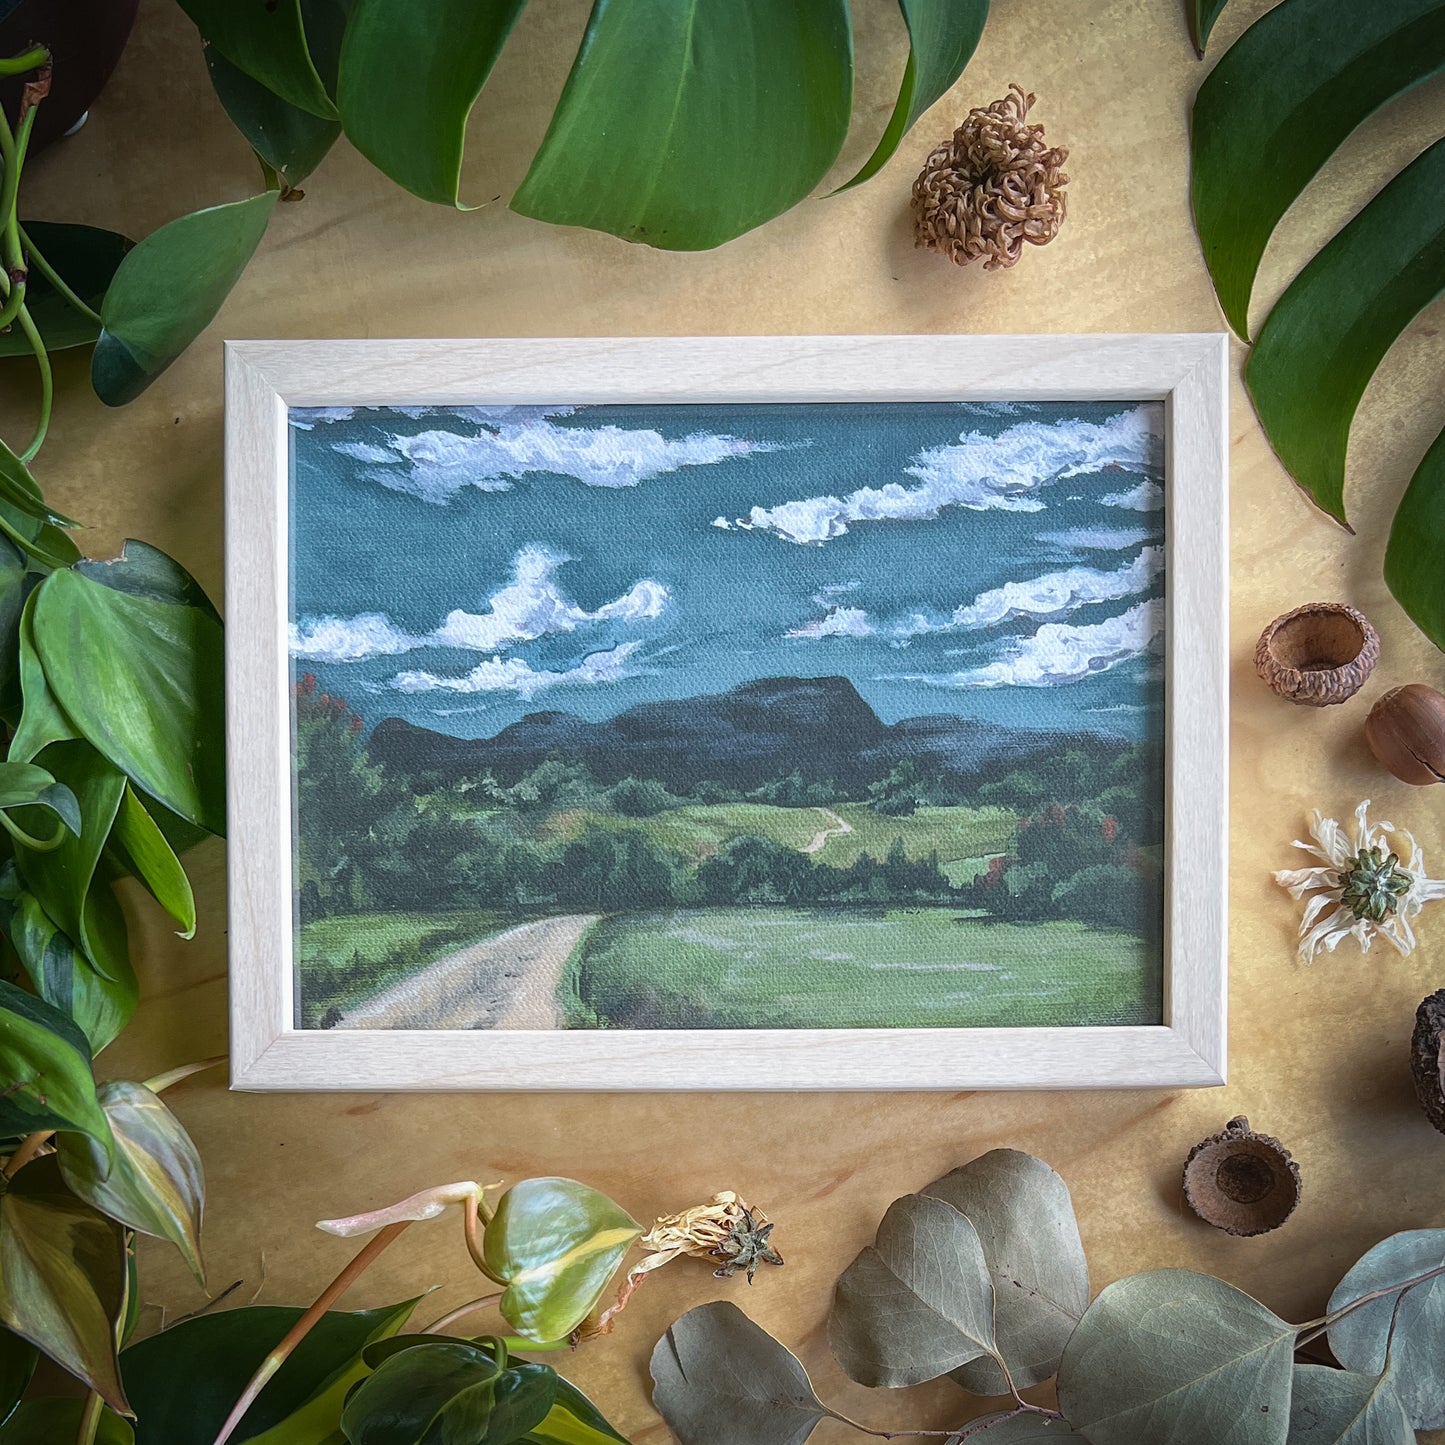 Canvas print of a mountain landscape in a light wood frame displayed on a wood table with plants and other natural items scattered around it